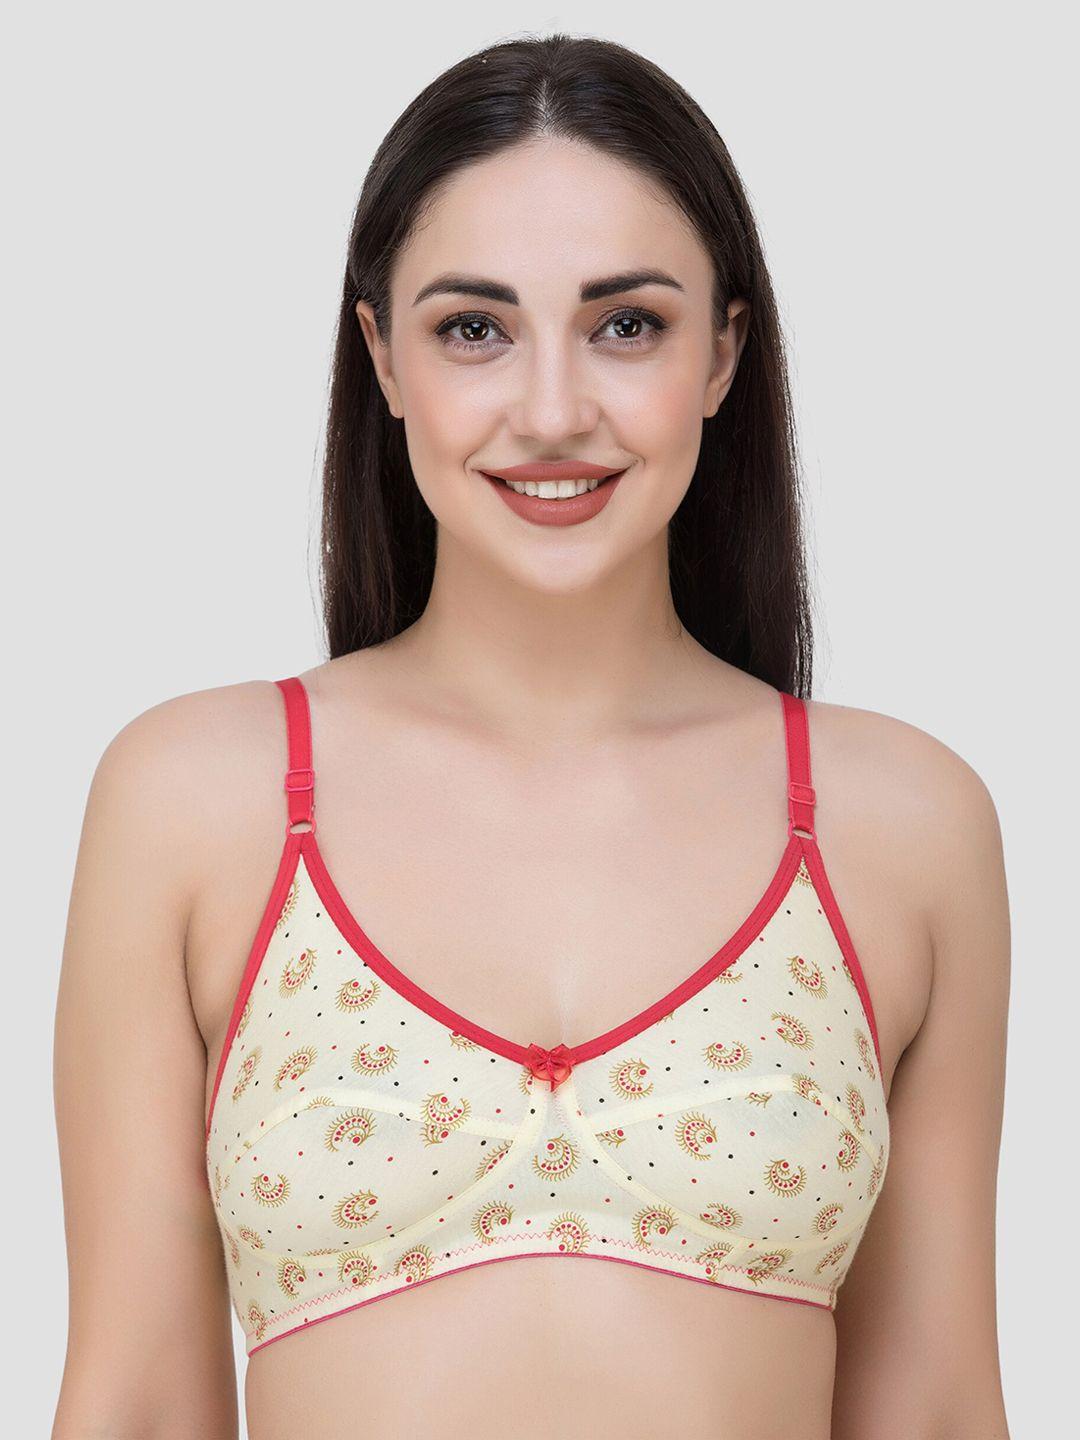 fasense women yellow & brown floral printed non-padded non-wired everyday bra bv006b